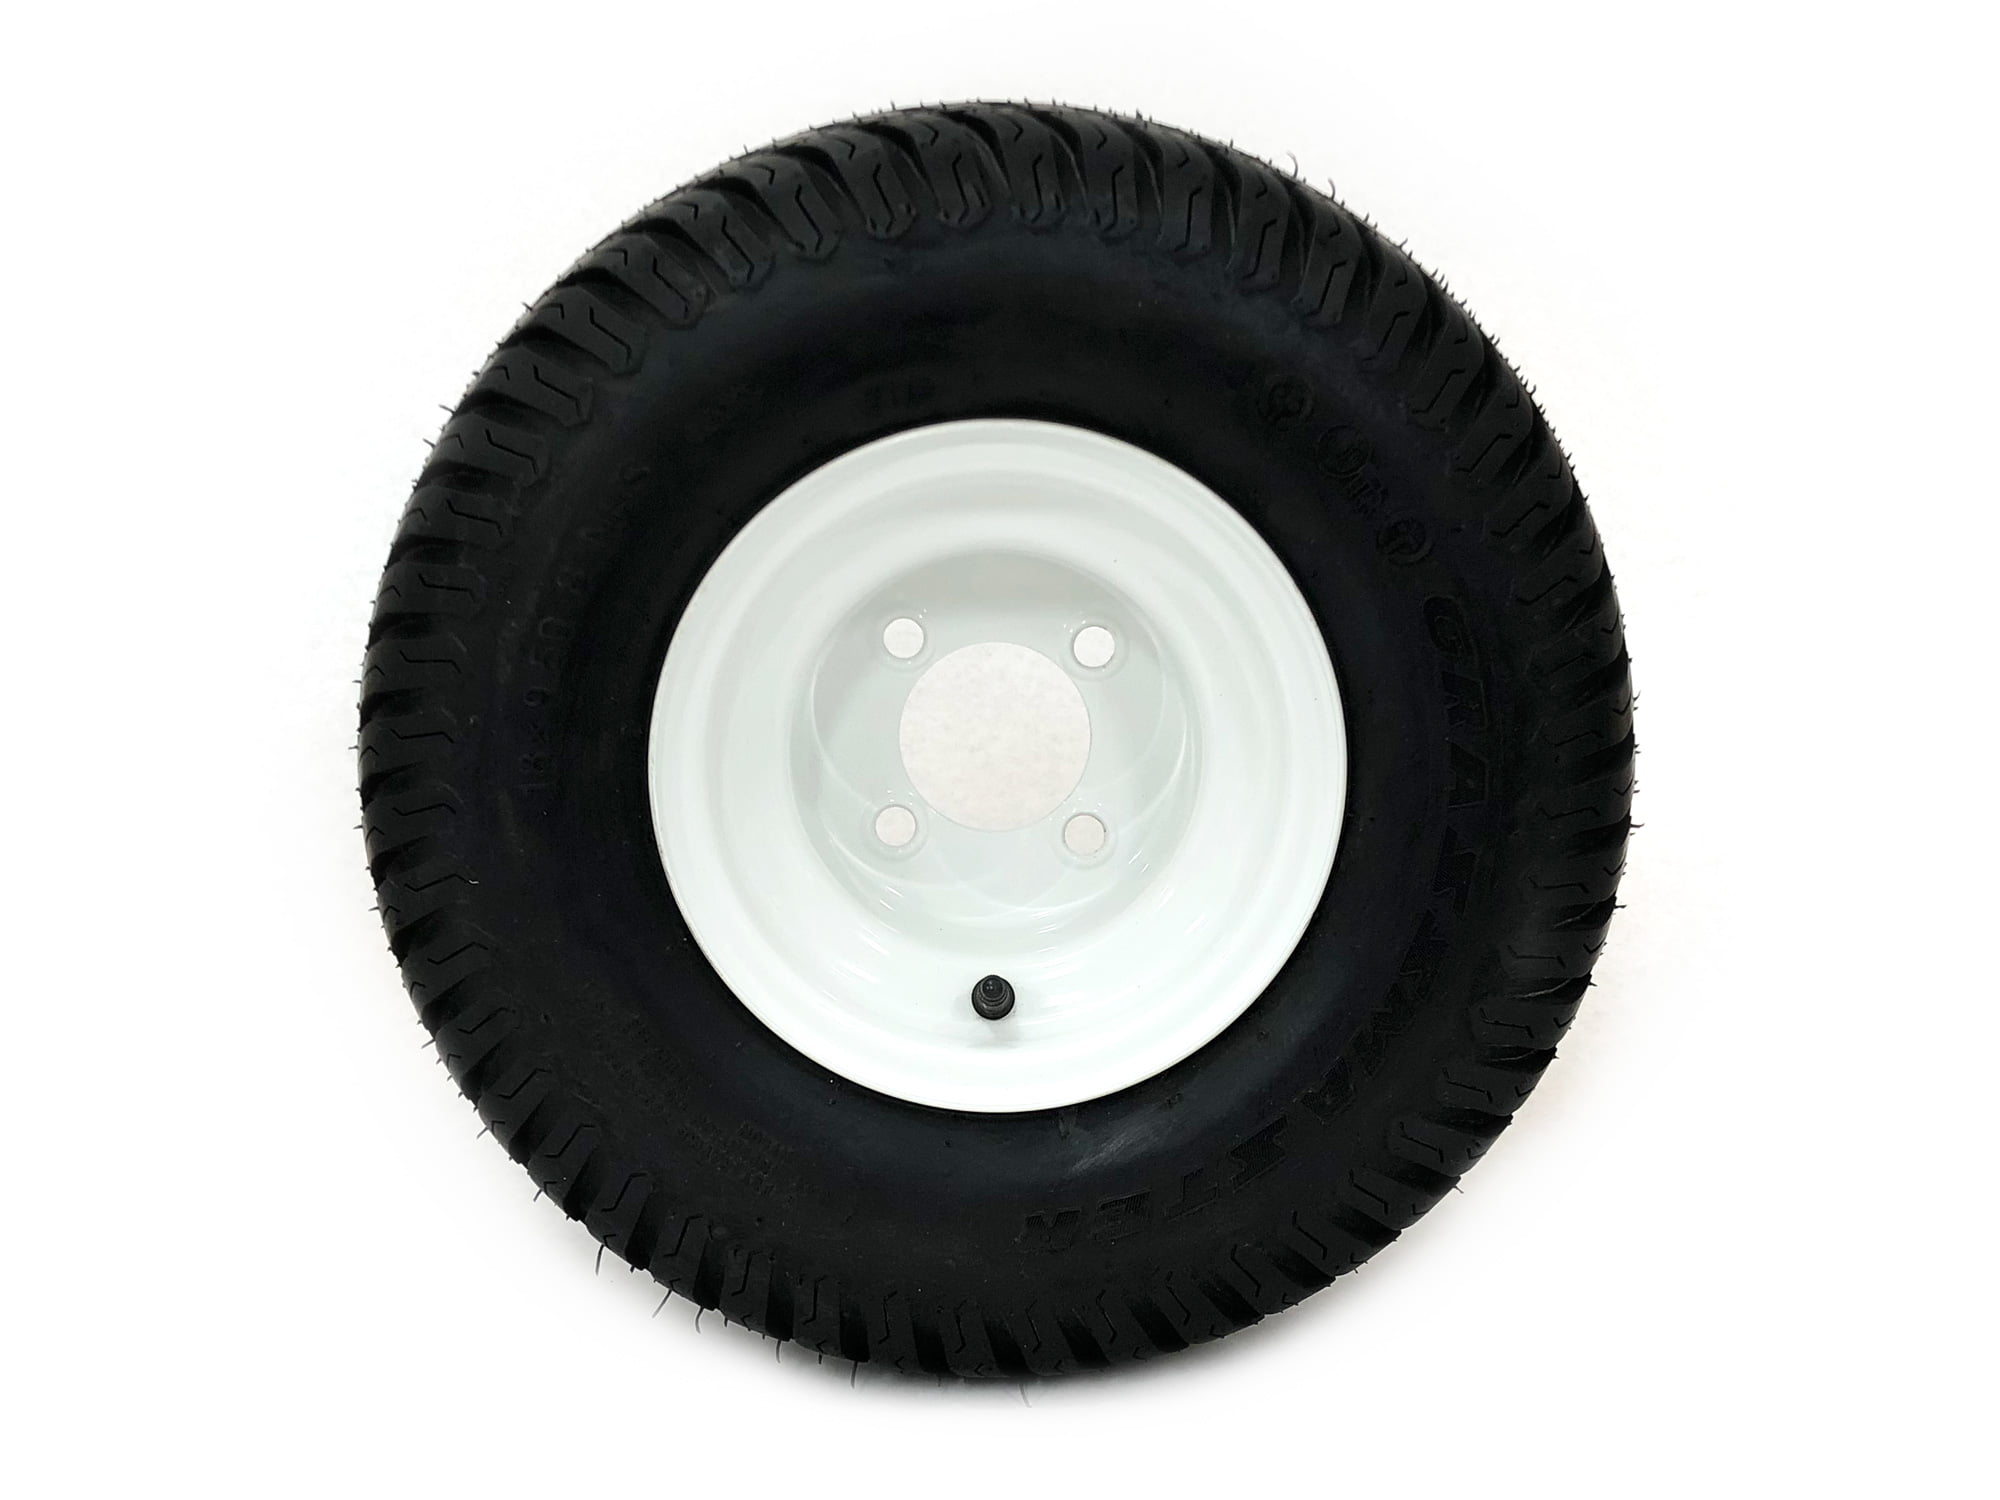 Toro Time Cutter Z Front Wheel Solid Rubber Flat Free Tire 110-6785 15087 